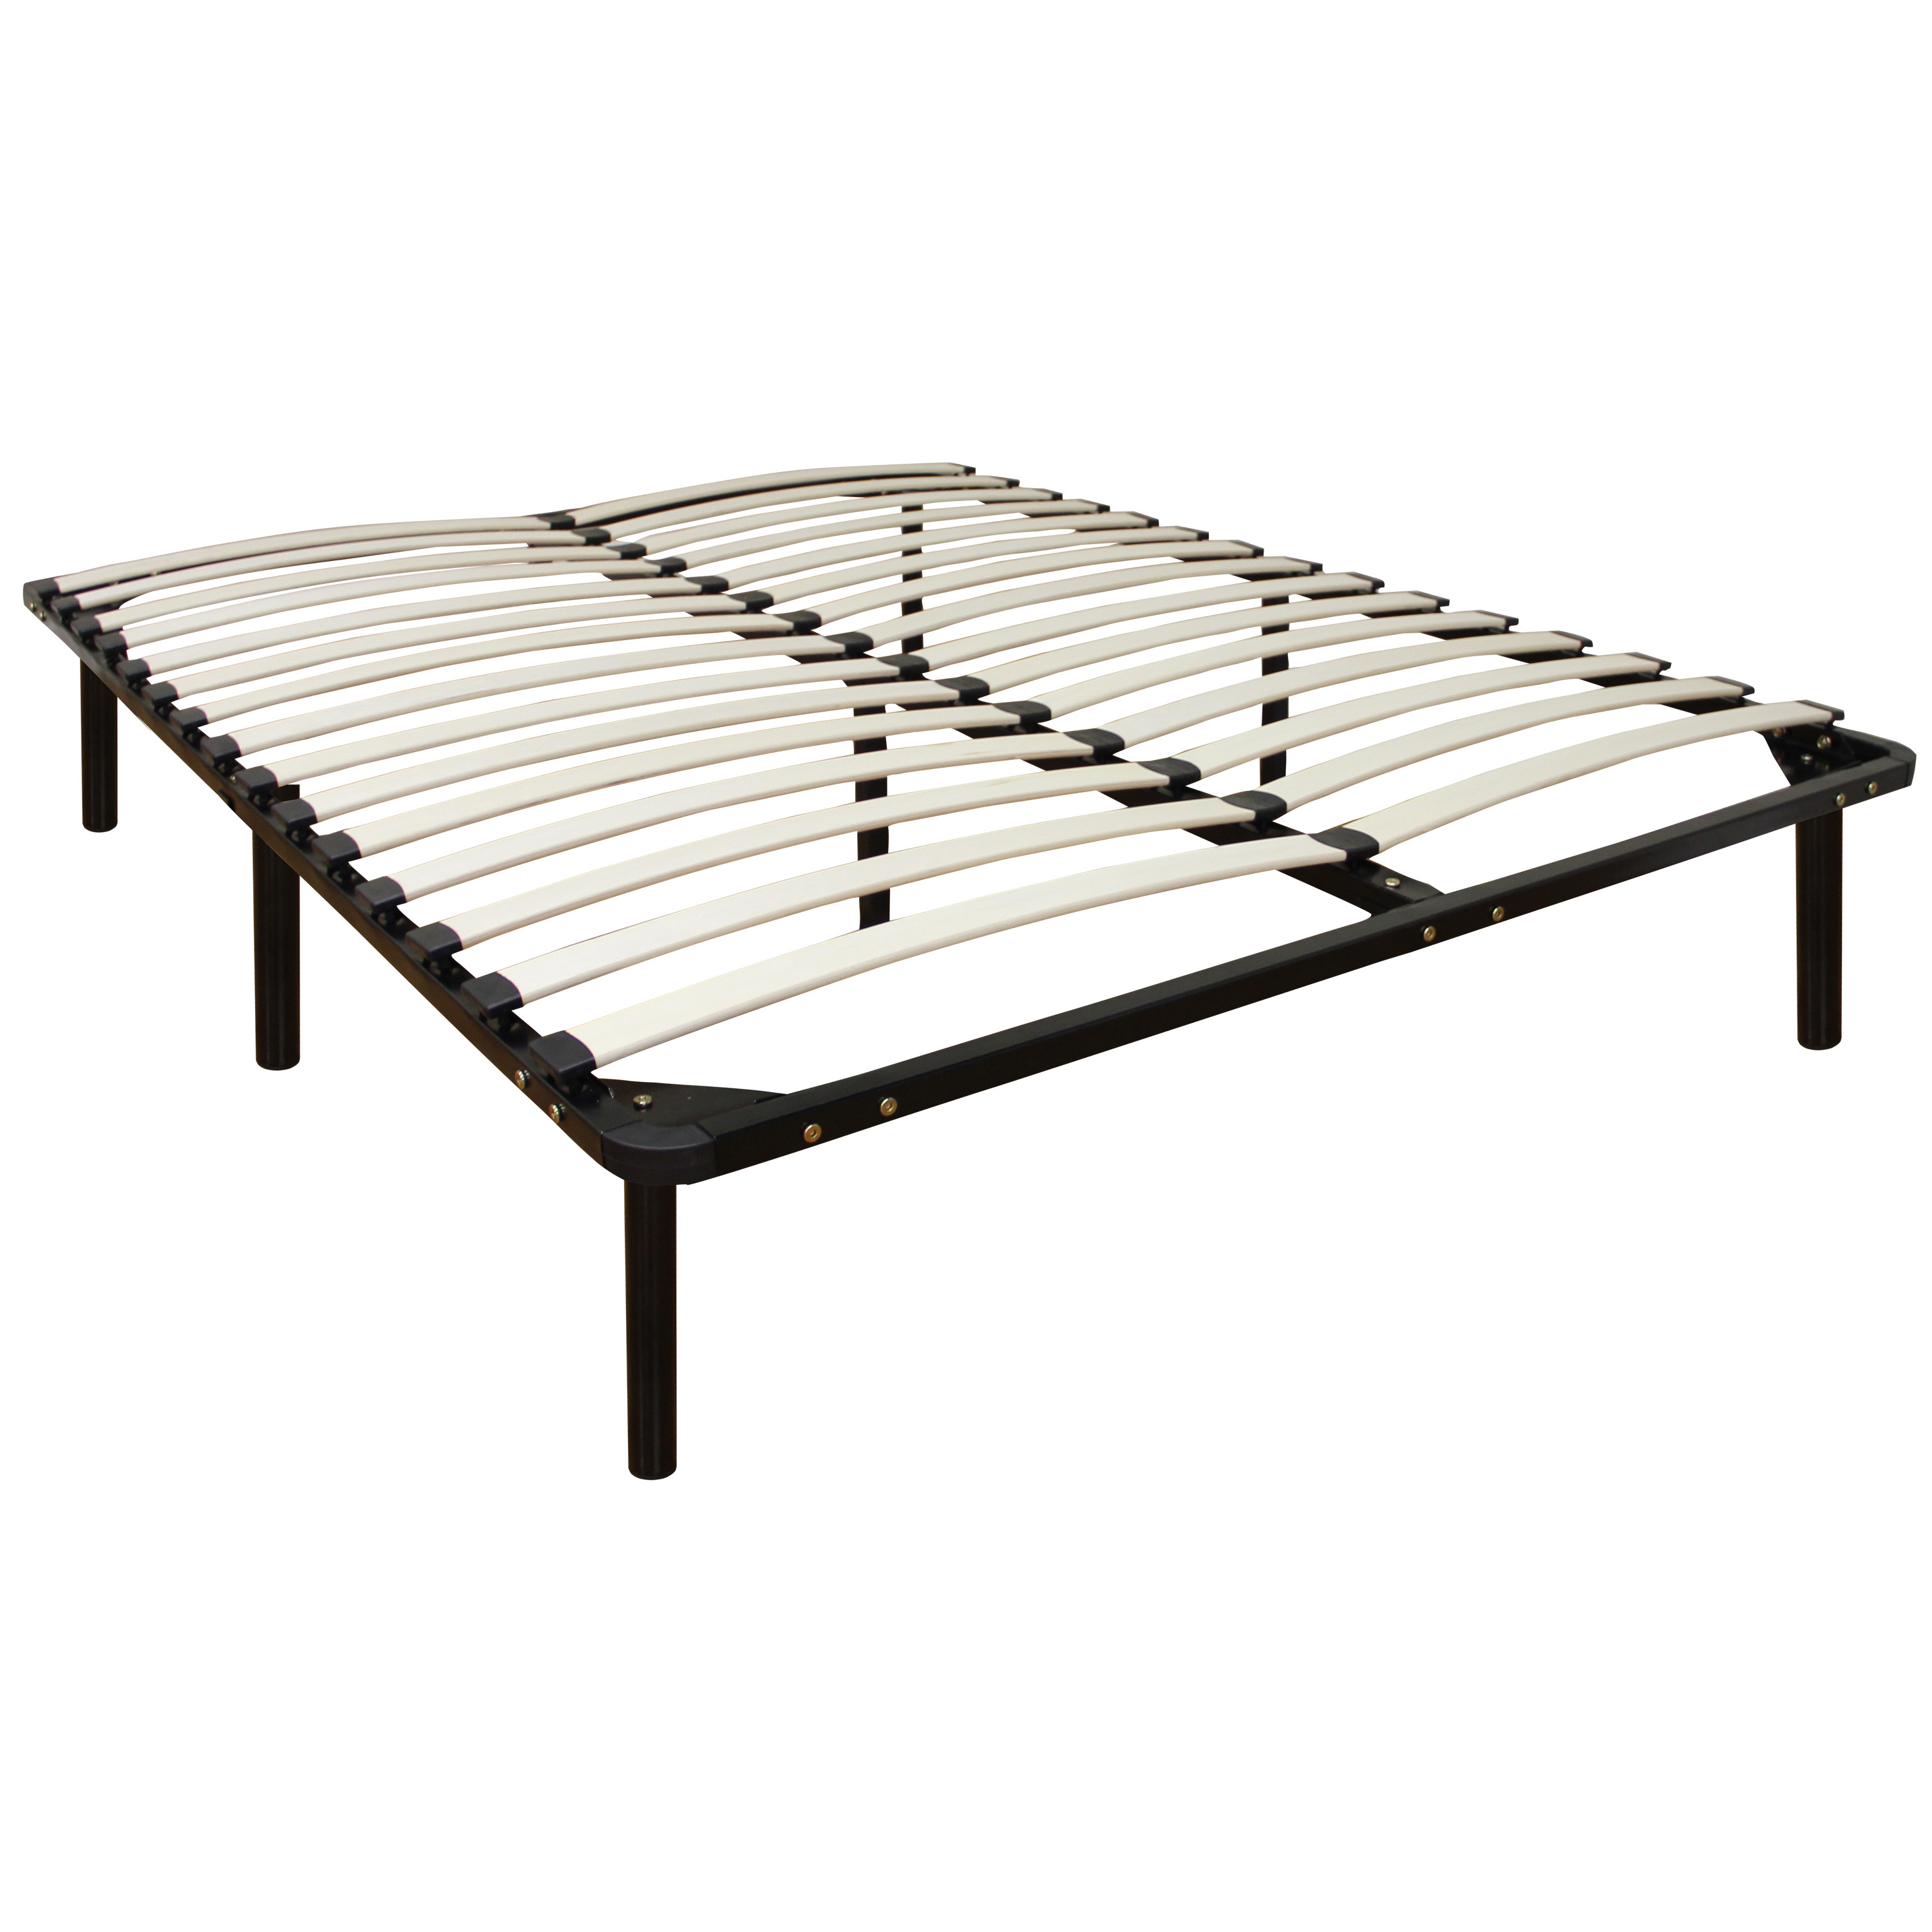 classy cal diy ikea wooden size beds canada lowes home depot and hercules bed frame california